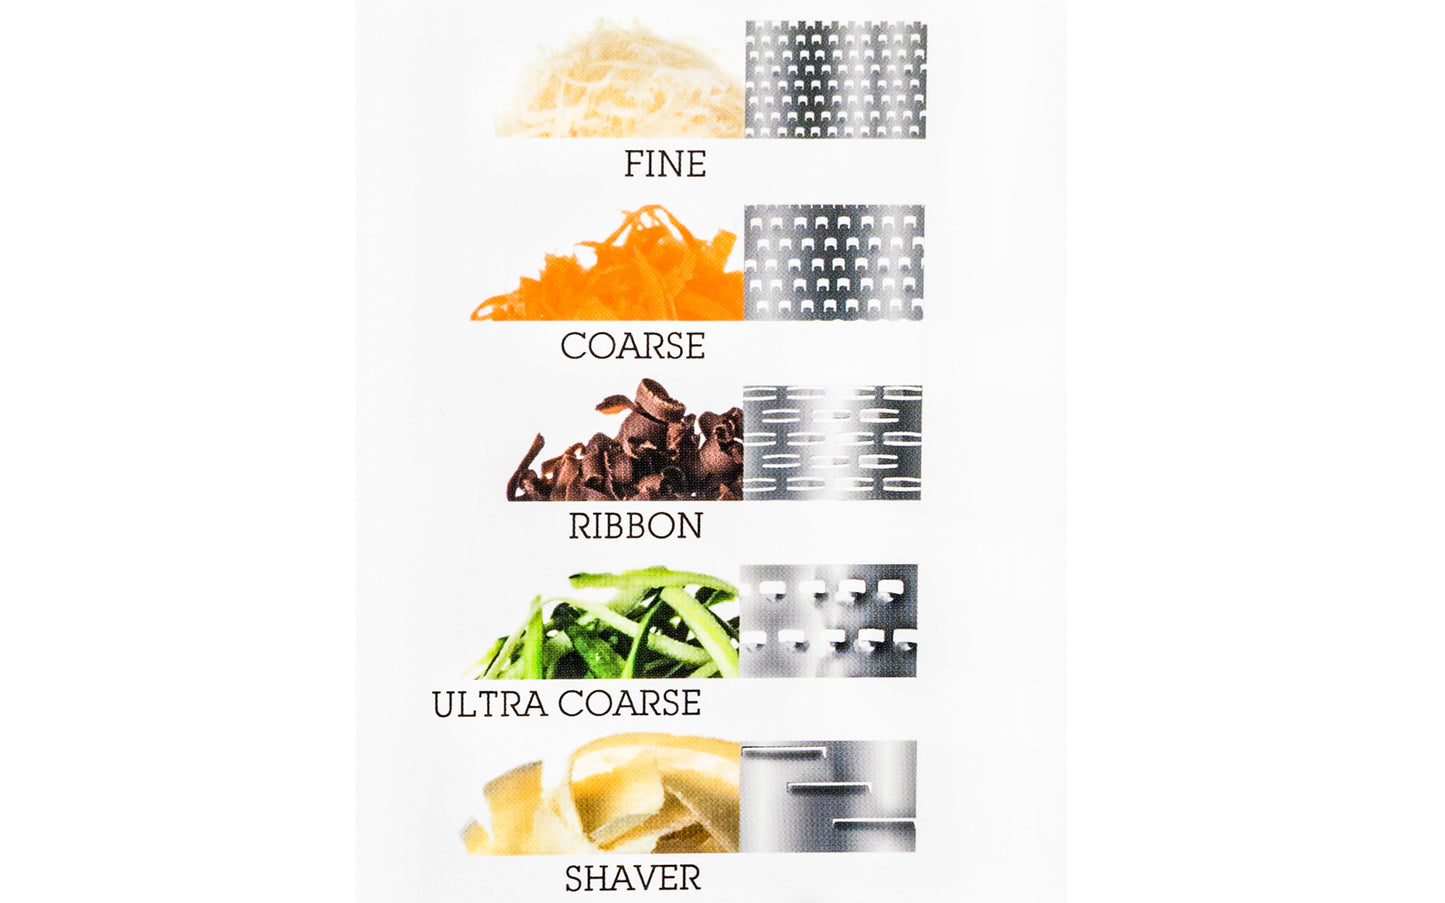 Made in USA - Blades made in USA - Elite Five Blade Grater - Microplane blade styles: Fine, Coarse, Ribbon, Ultra Coarse, Shaver - Box Grater - Model 34009 - Slicing - Grating - Shaving - 5 Blade Grater - Box Grater - 098399340098 - Non-slip hand grip - Dishwasher safe - Razor-sharp blades made from stainless steel